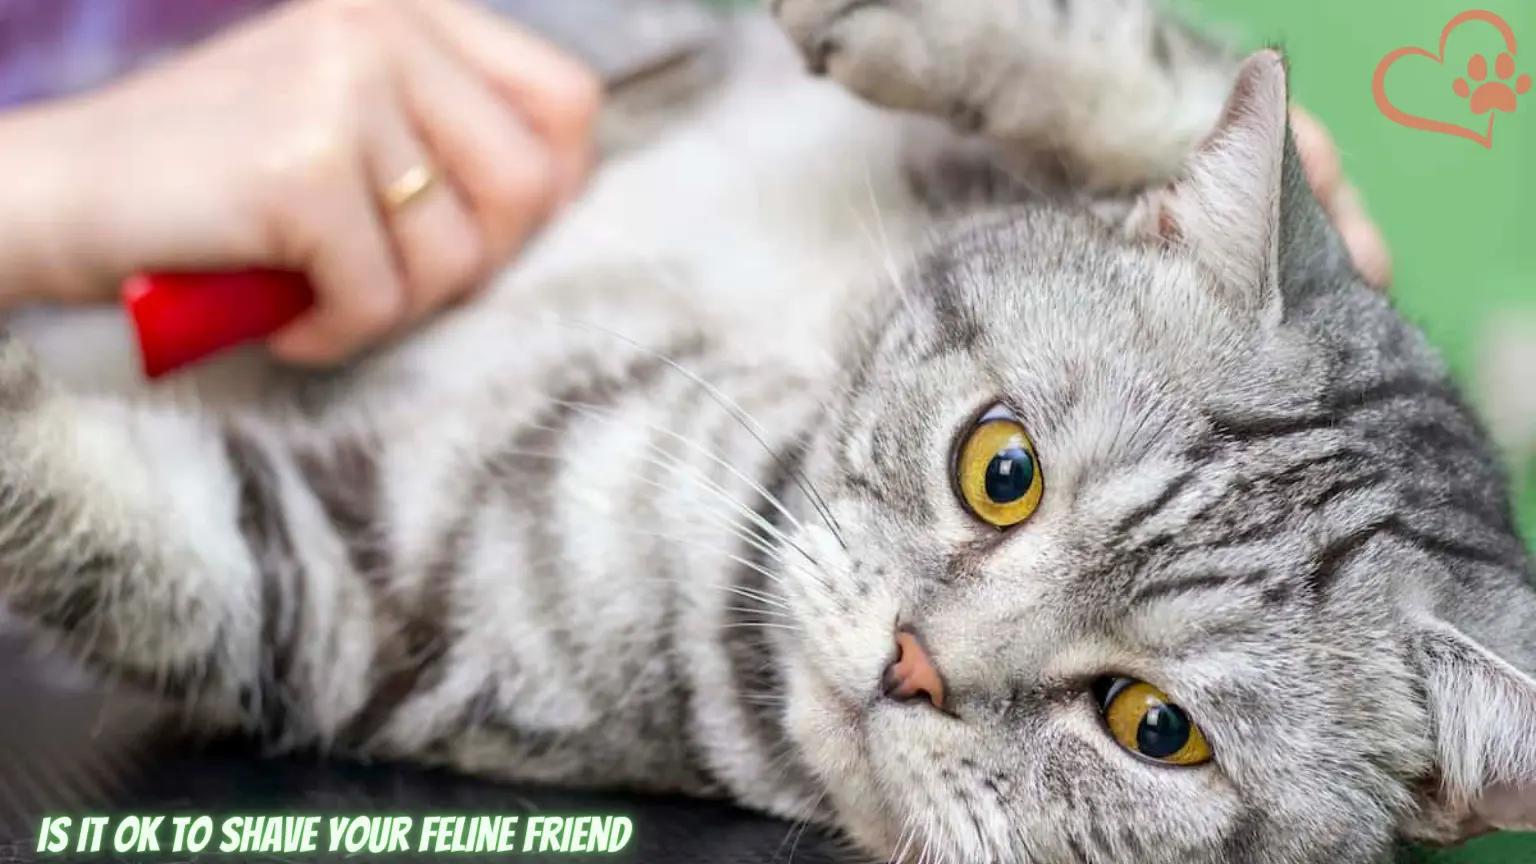 Does Shaving a Cat Ruin its Fur or Coat – Groom your Feline Friend without Shaving